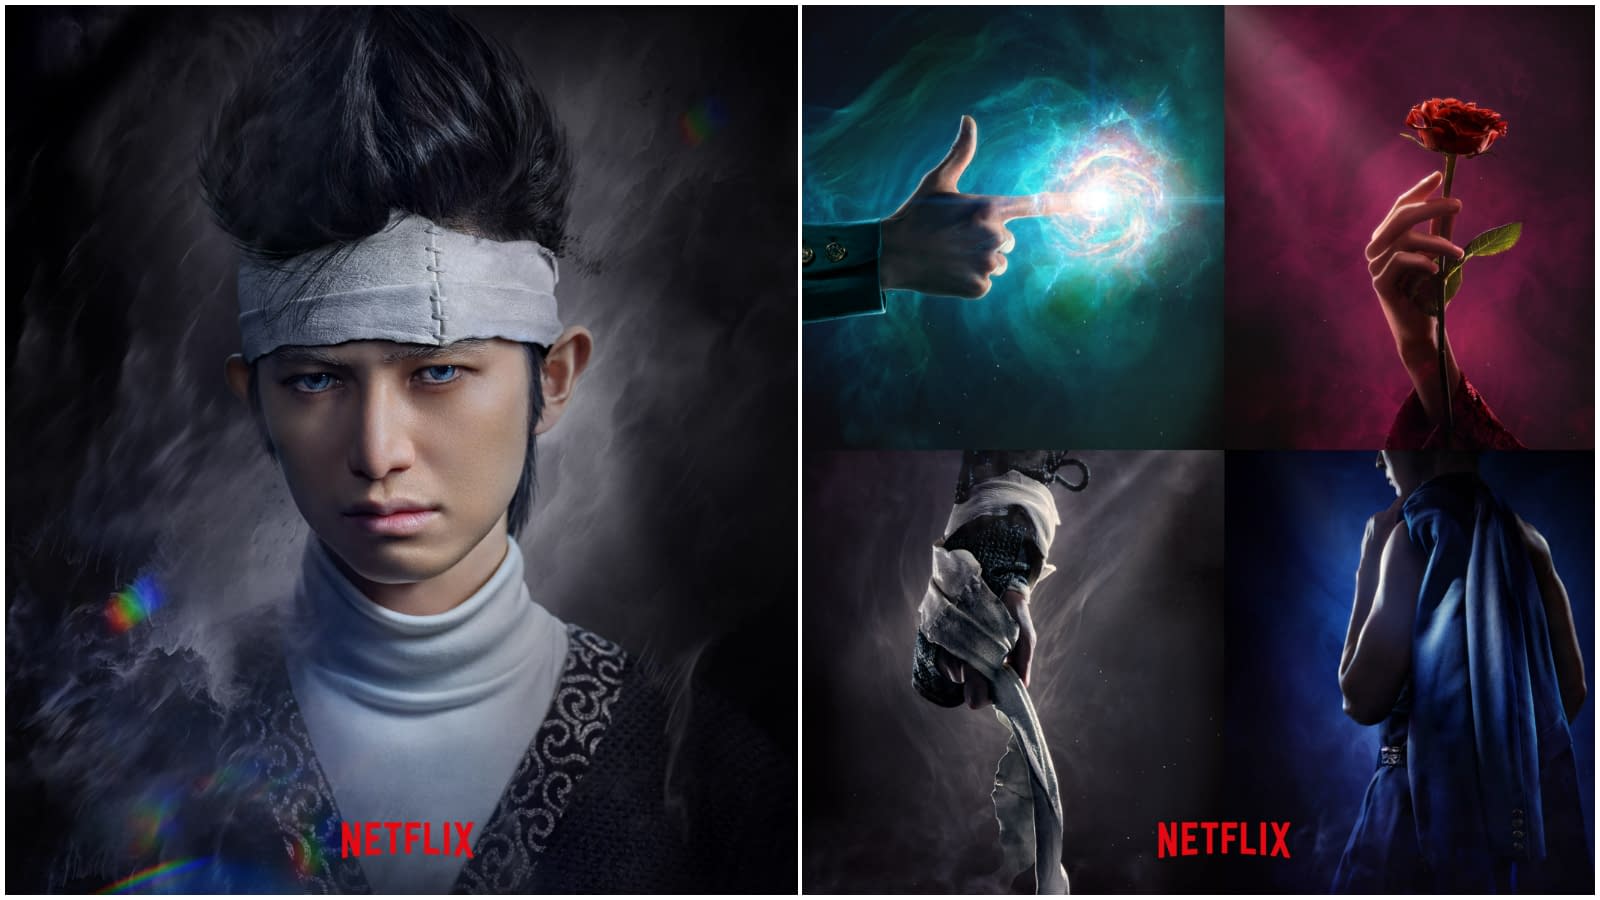 How bad this live action it's gonna be ? : r/YuYuHakusho